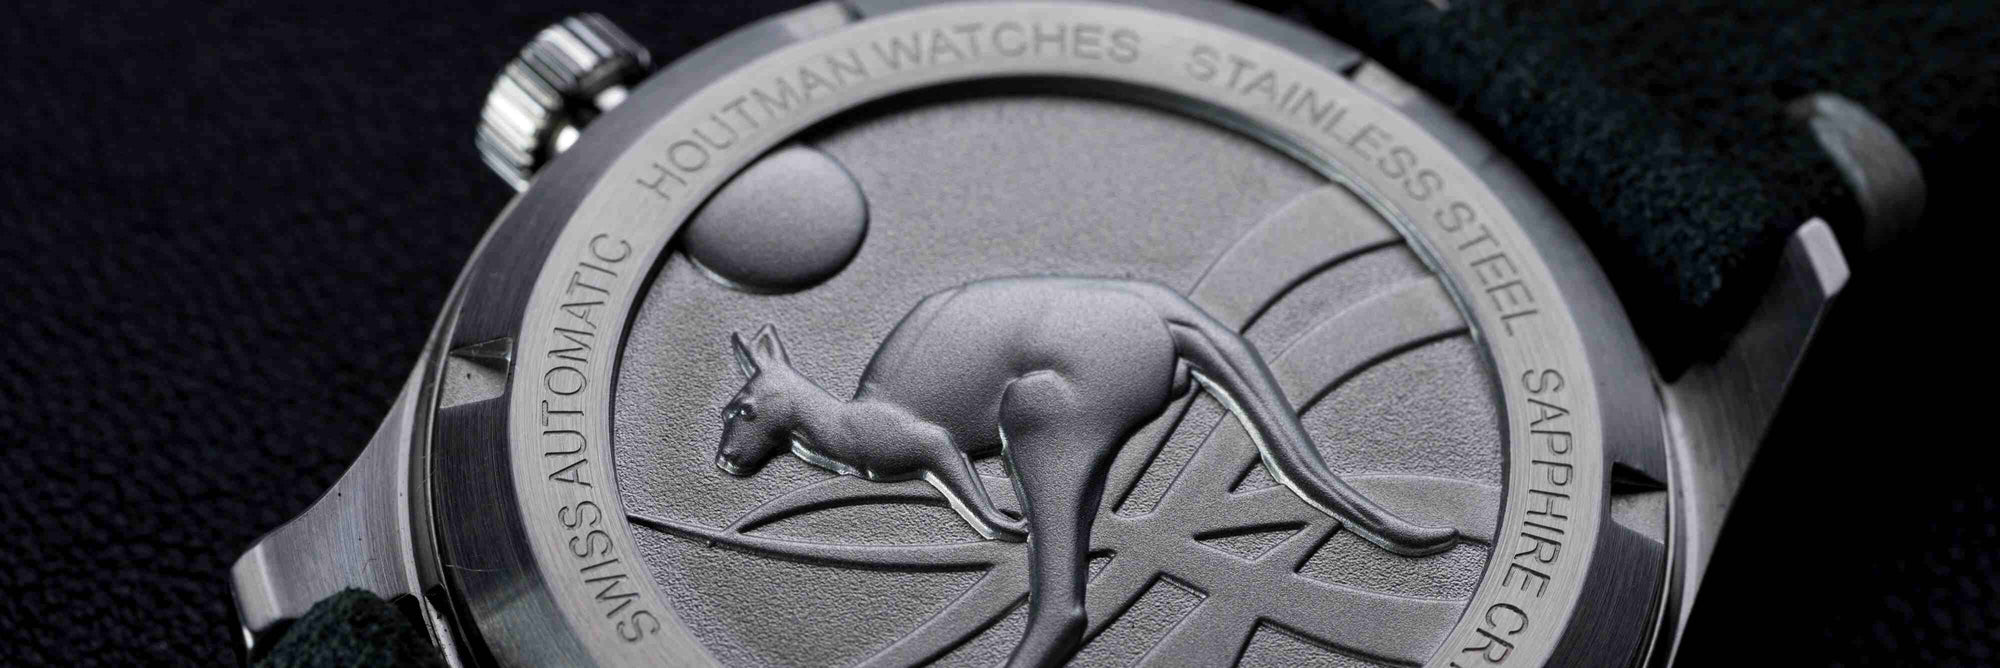 3d Embossed kangaroo image on stainless steel watch case bacl 